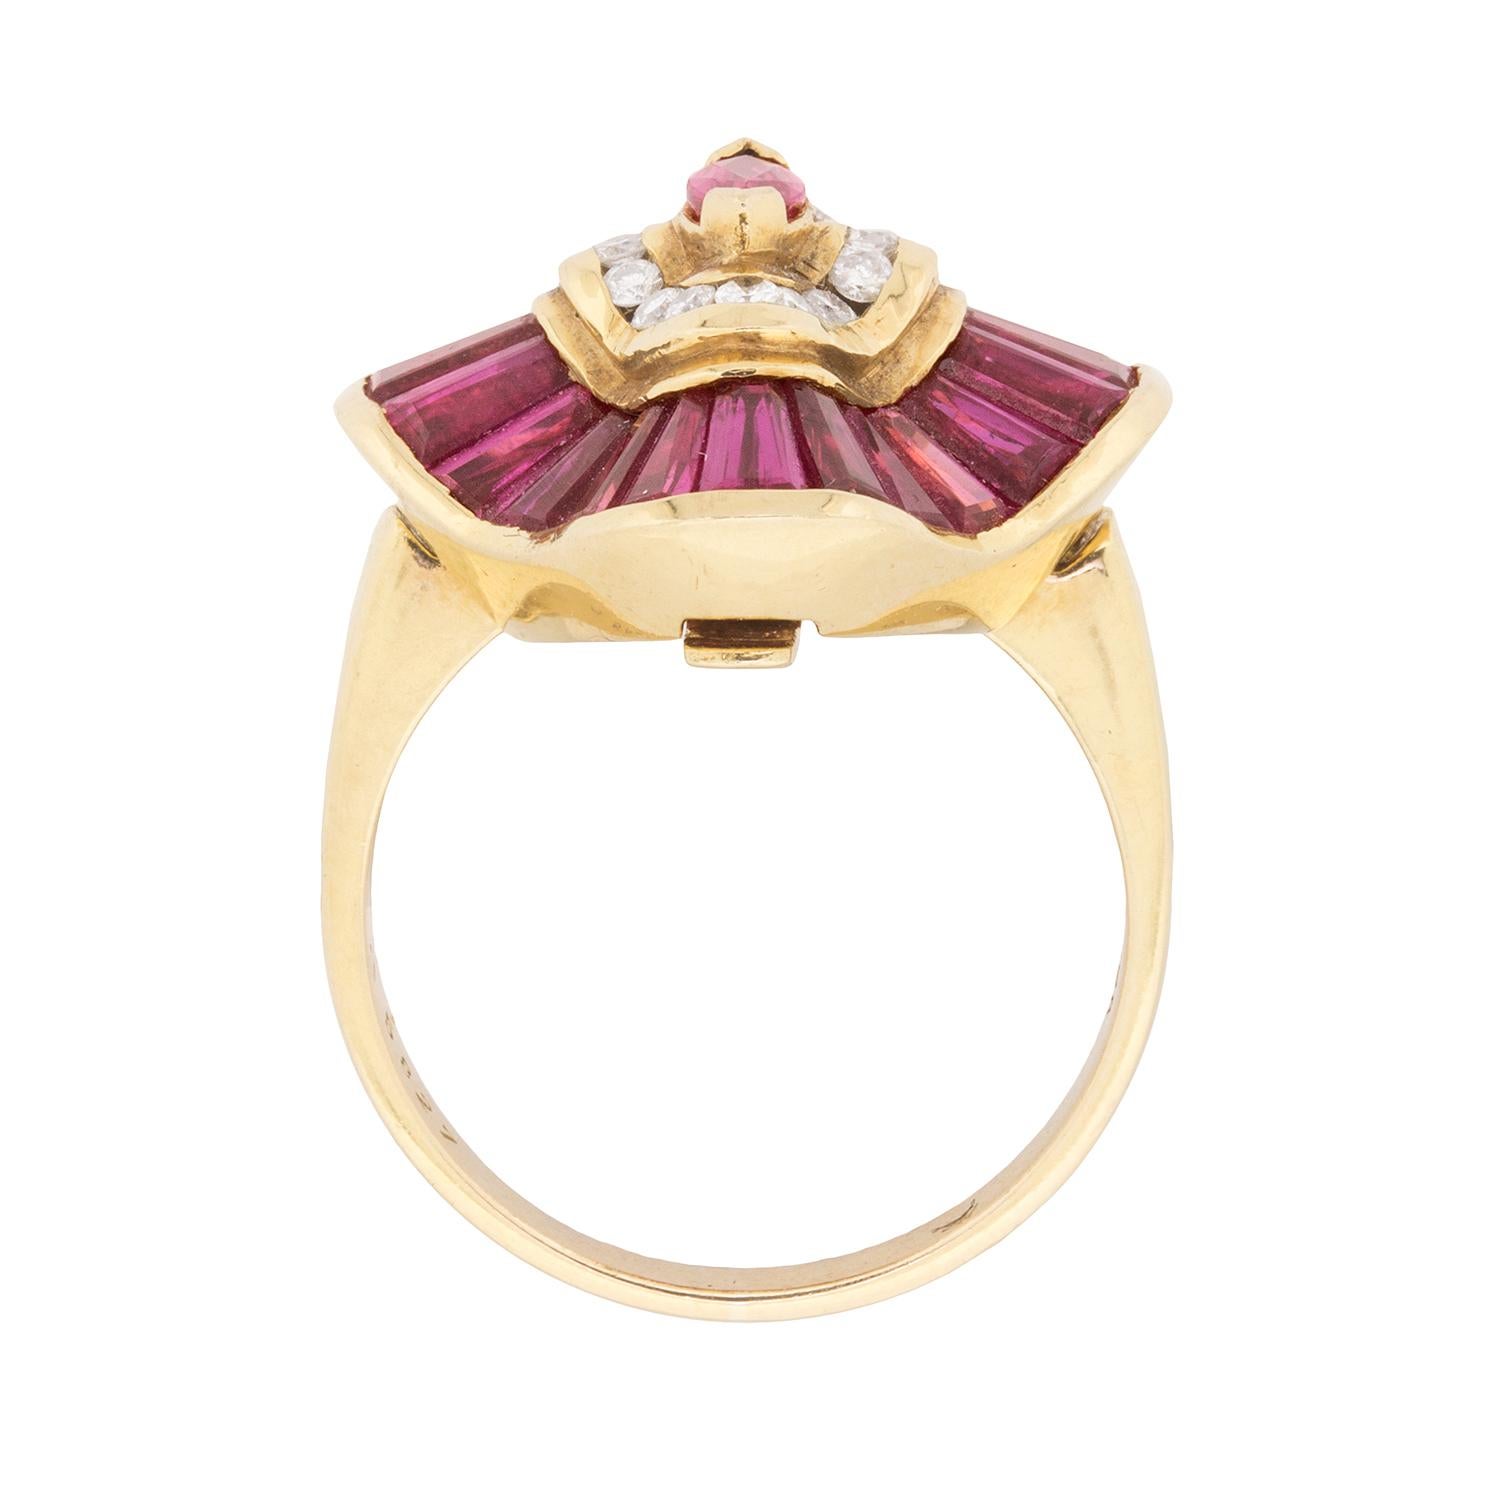 This sensational circa 1970s ruby and diamond cocktail ring converts to a pendant!

This unusual piece centres one marquise-shaped ruby vertically set with French tips inside a concentric channel set row of 0.16ct round brilliant cut diamonds, and a